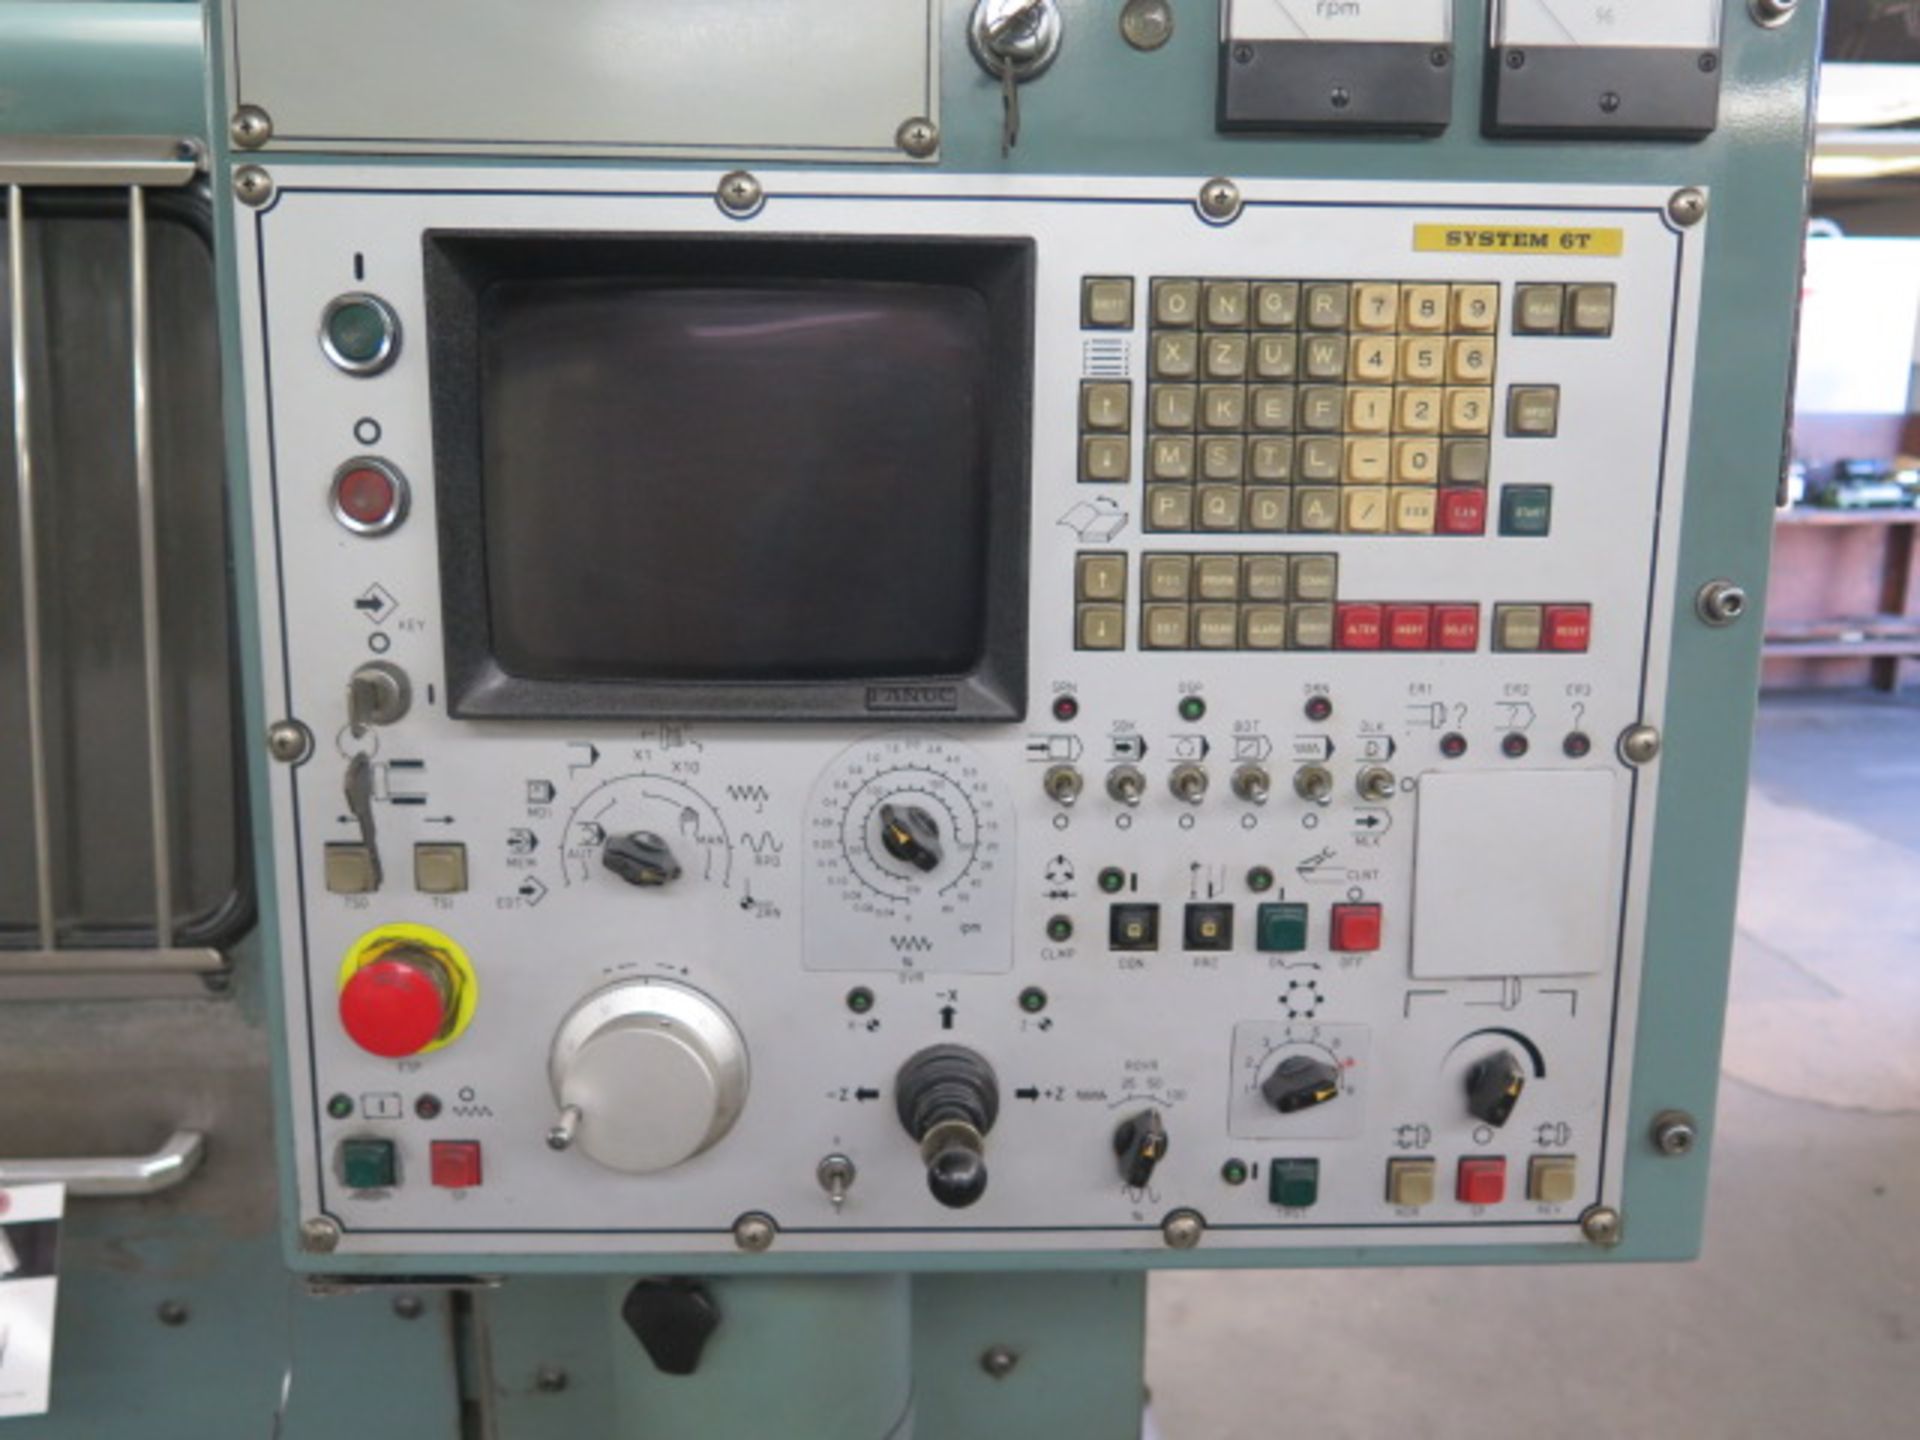 Mori Seiki SL-1H CNC Turning Center s/n 1168 w/ Fanuc 6T Controls, 8-Station Turret, SOLD AS IS - Image 9 of 14